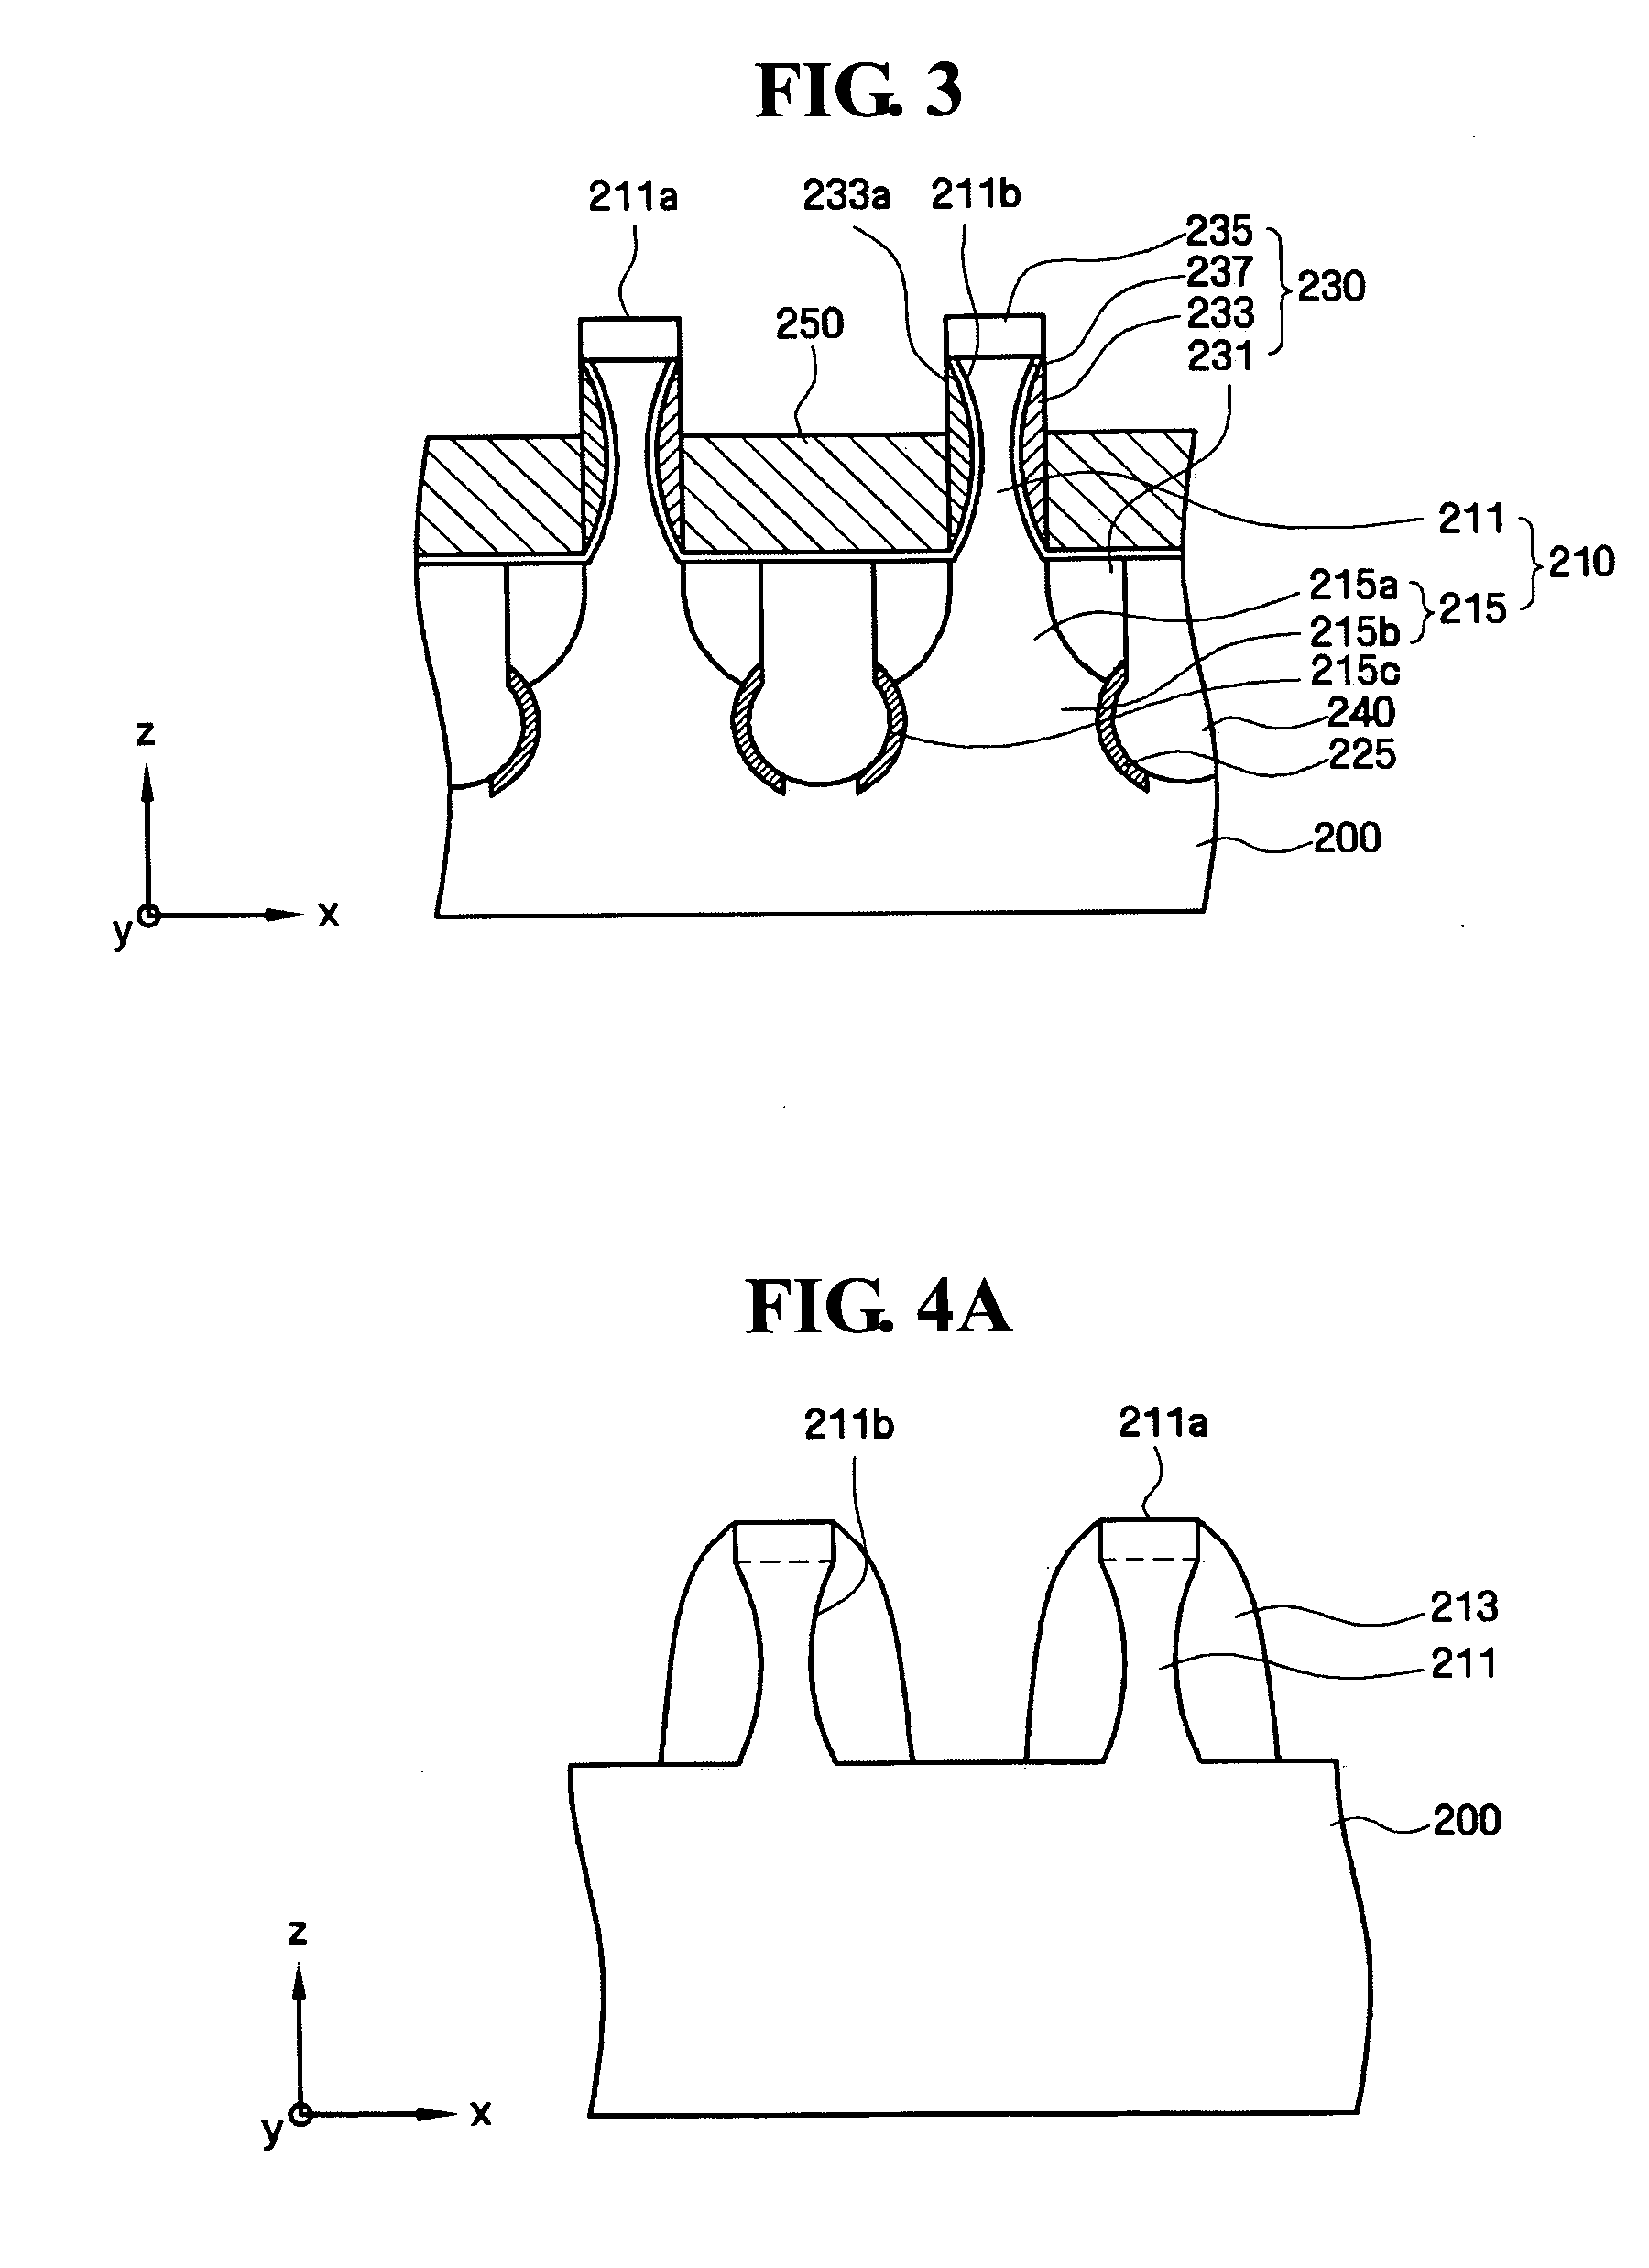 Methods of manufacturing semiconductor devices and semiconductor devices manufactured using such a method